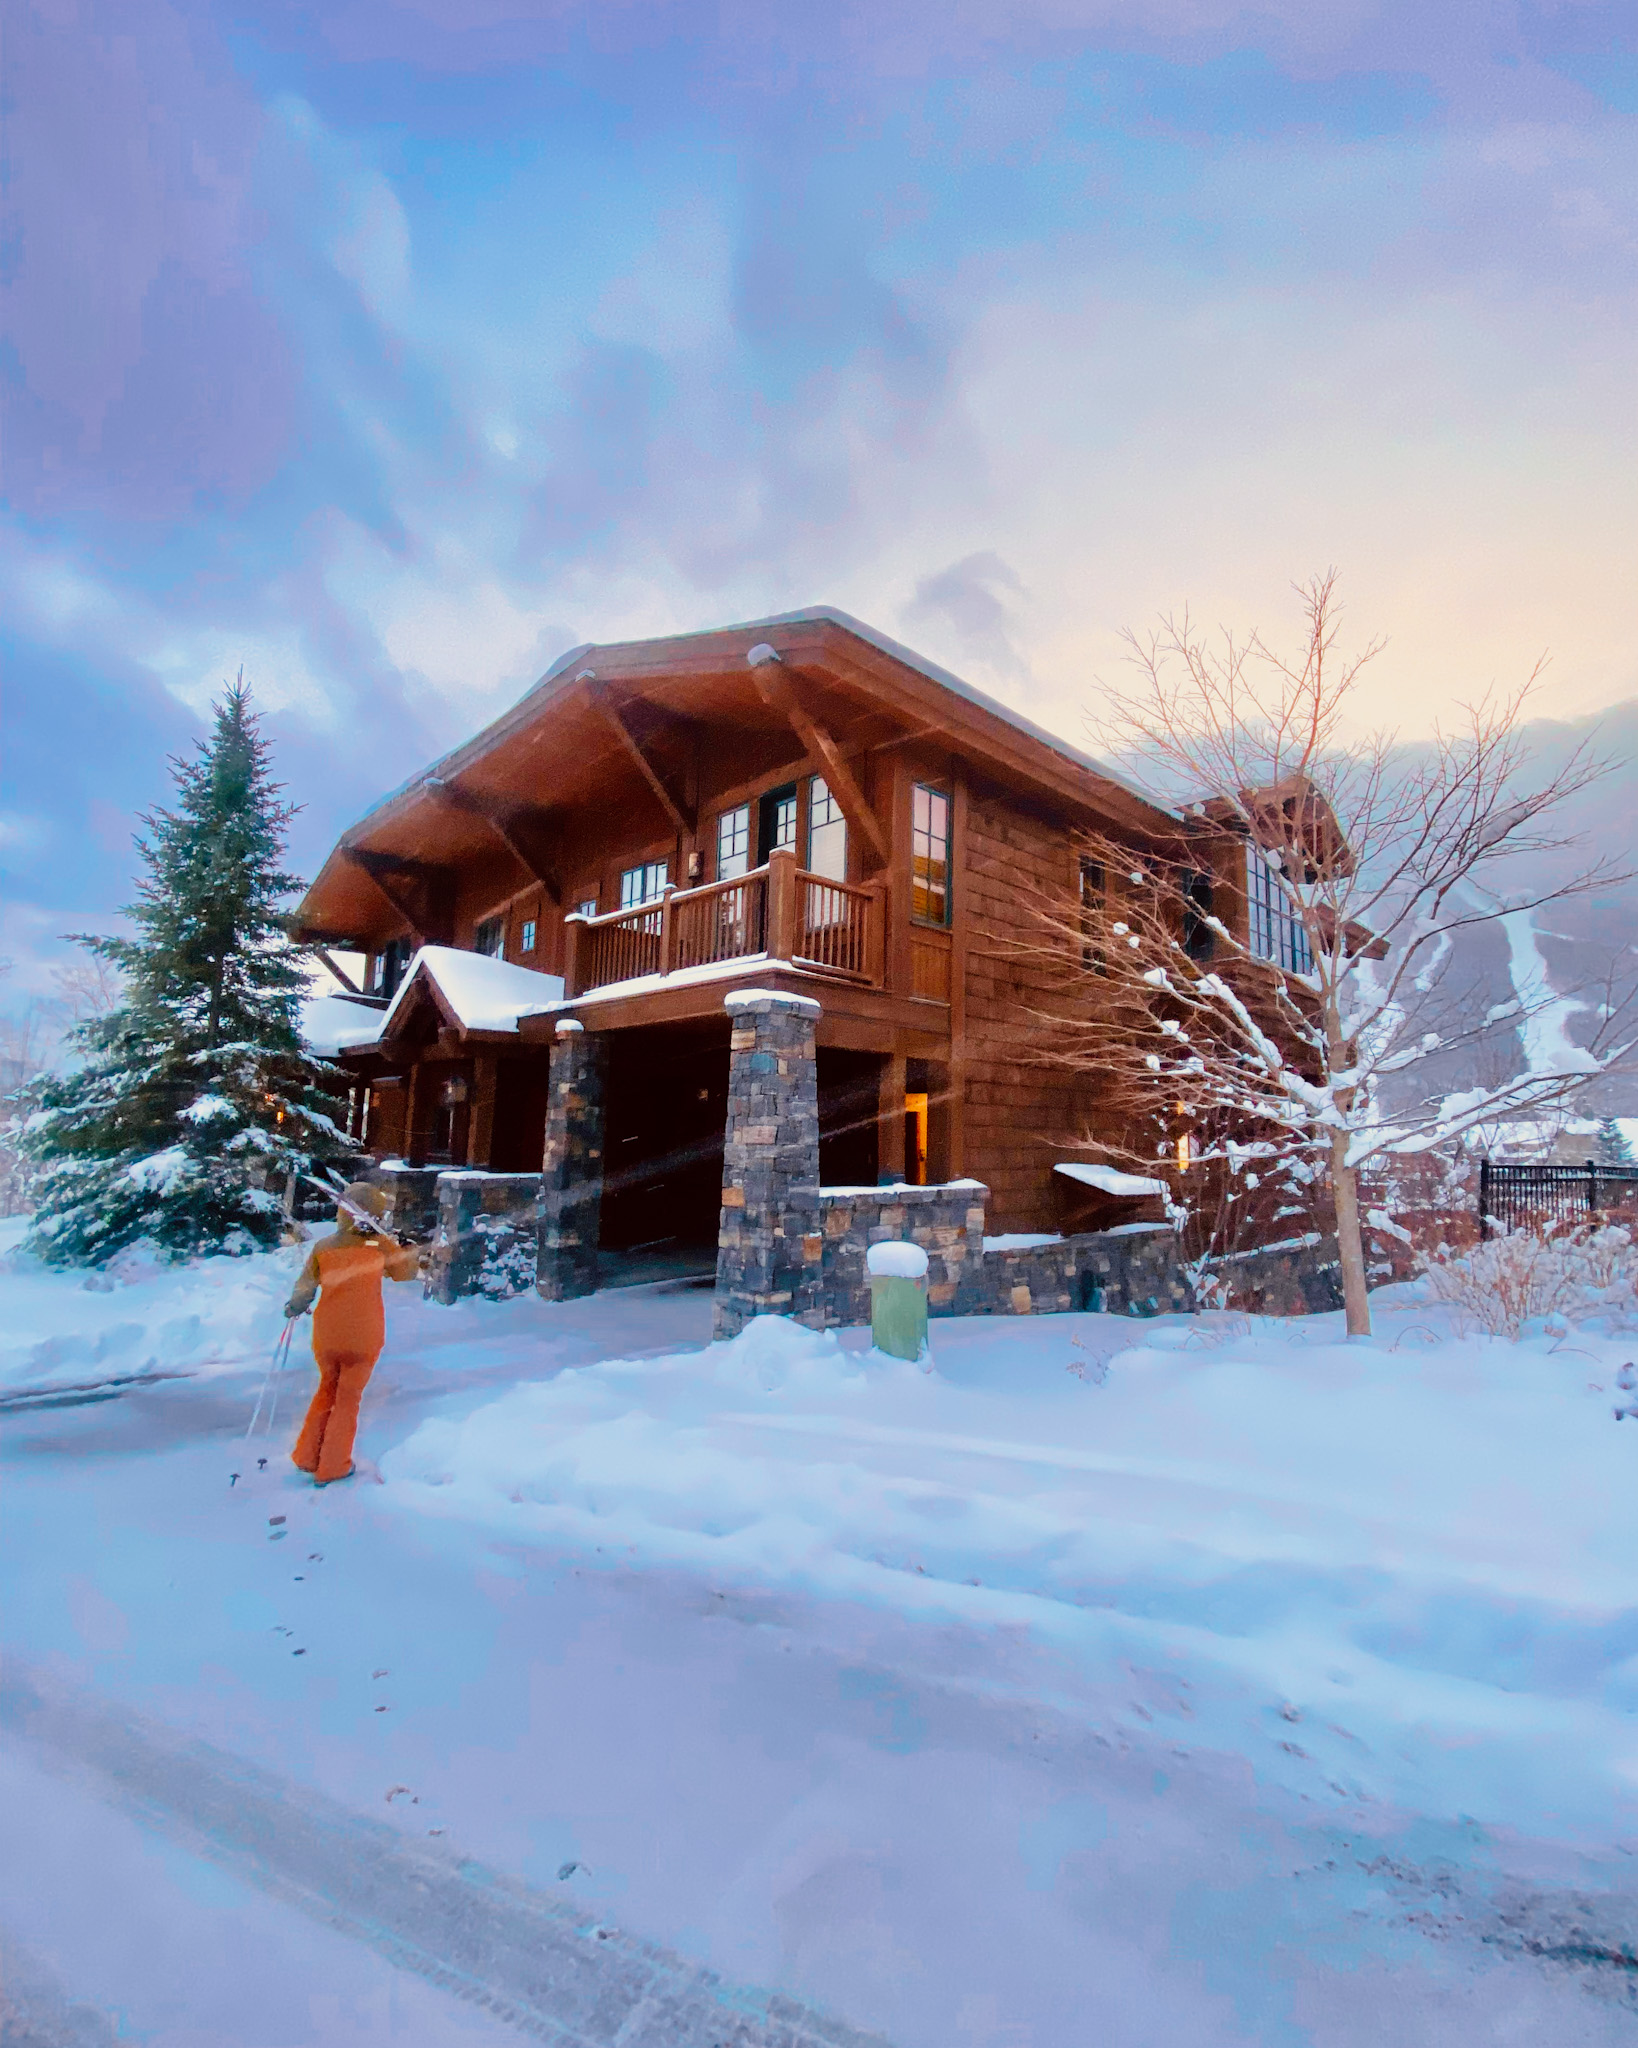 3& 4 Bedroom Stowe Vacation Rentals at the Lodge At Spruce Peak